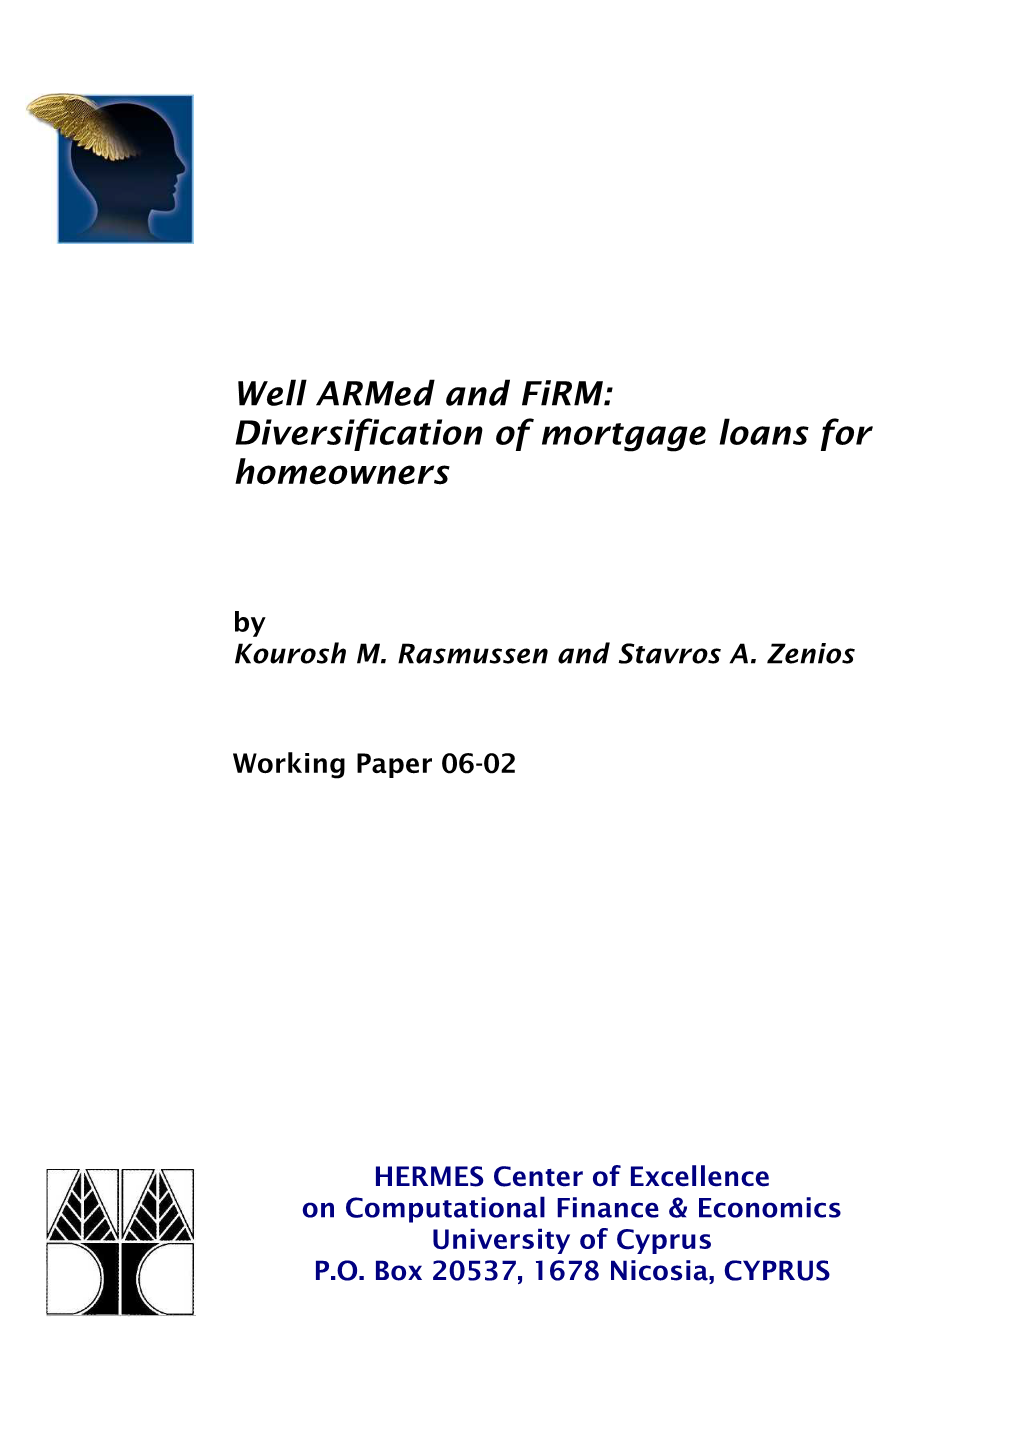 Well Armed and Firm: Diversification of Mortgage Loans for Homeowners